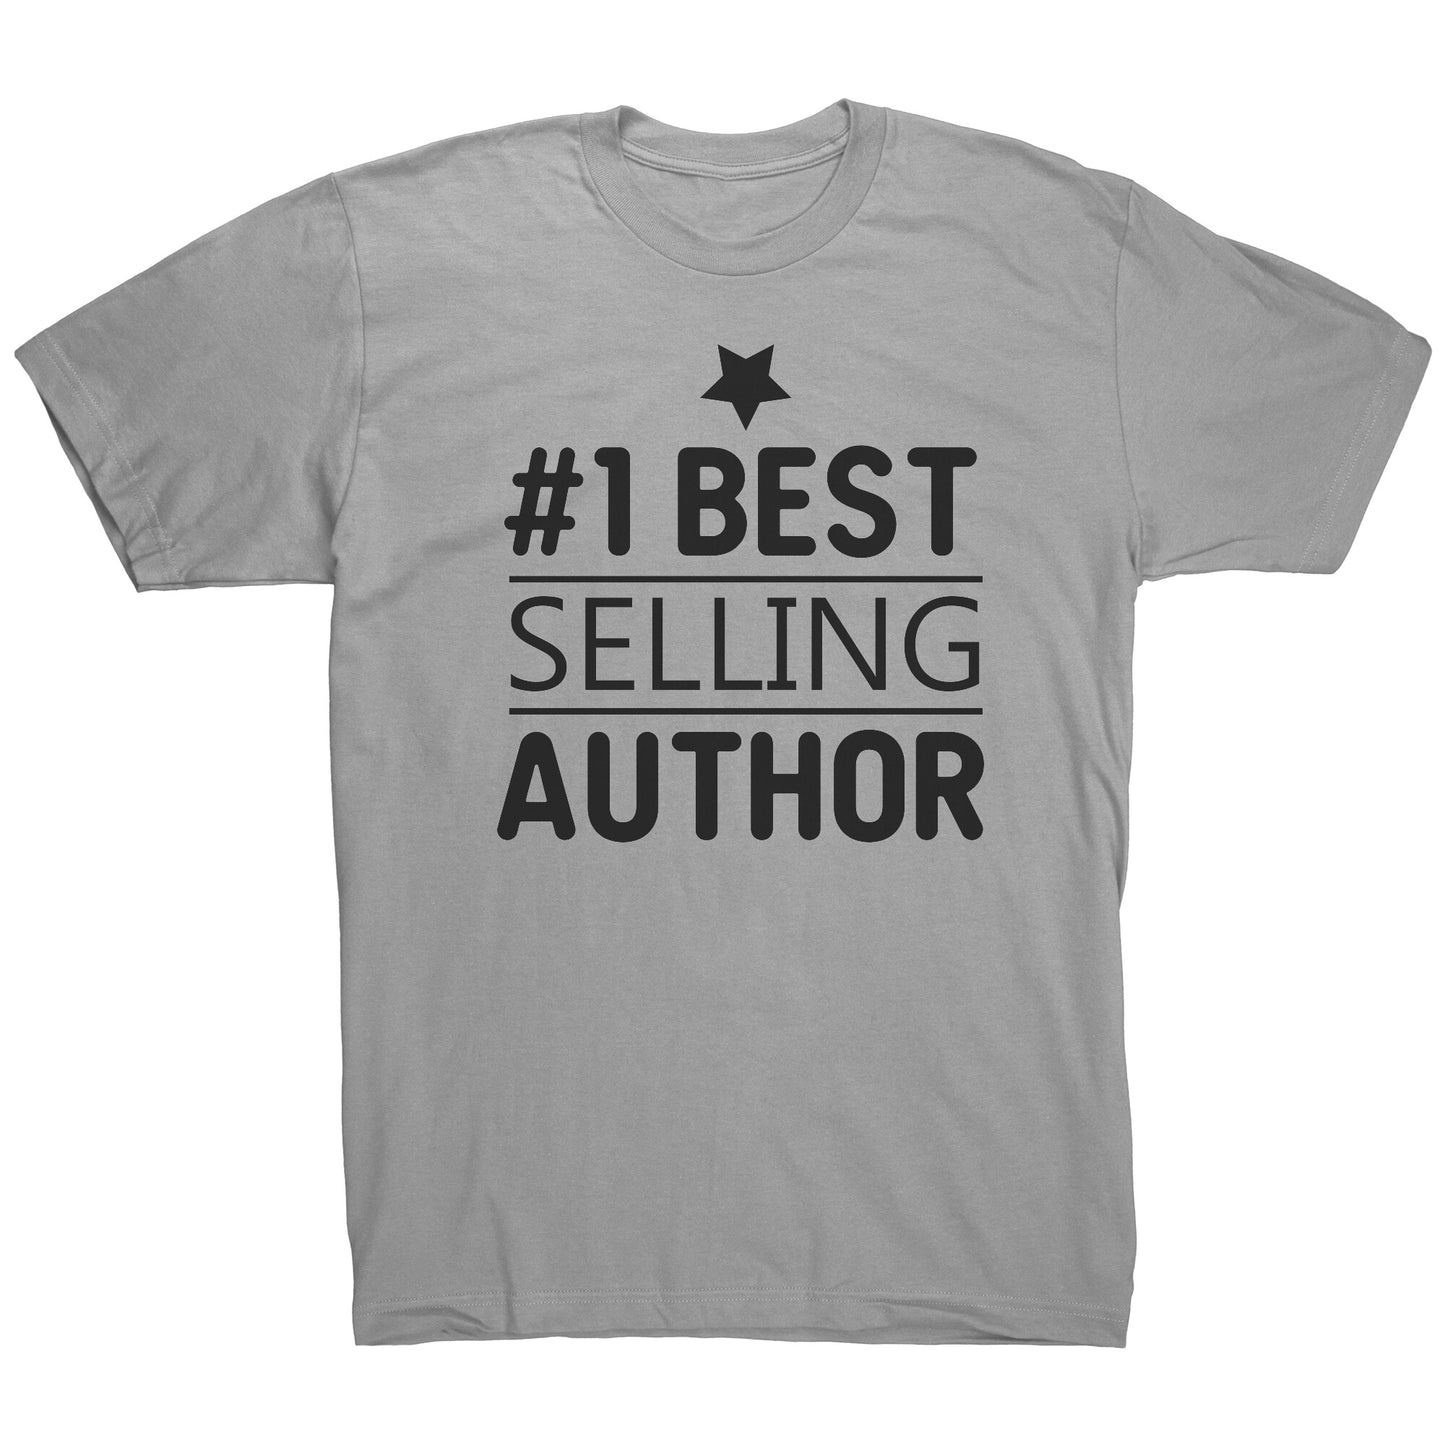 #1 Best Selling Author with a Star